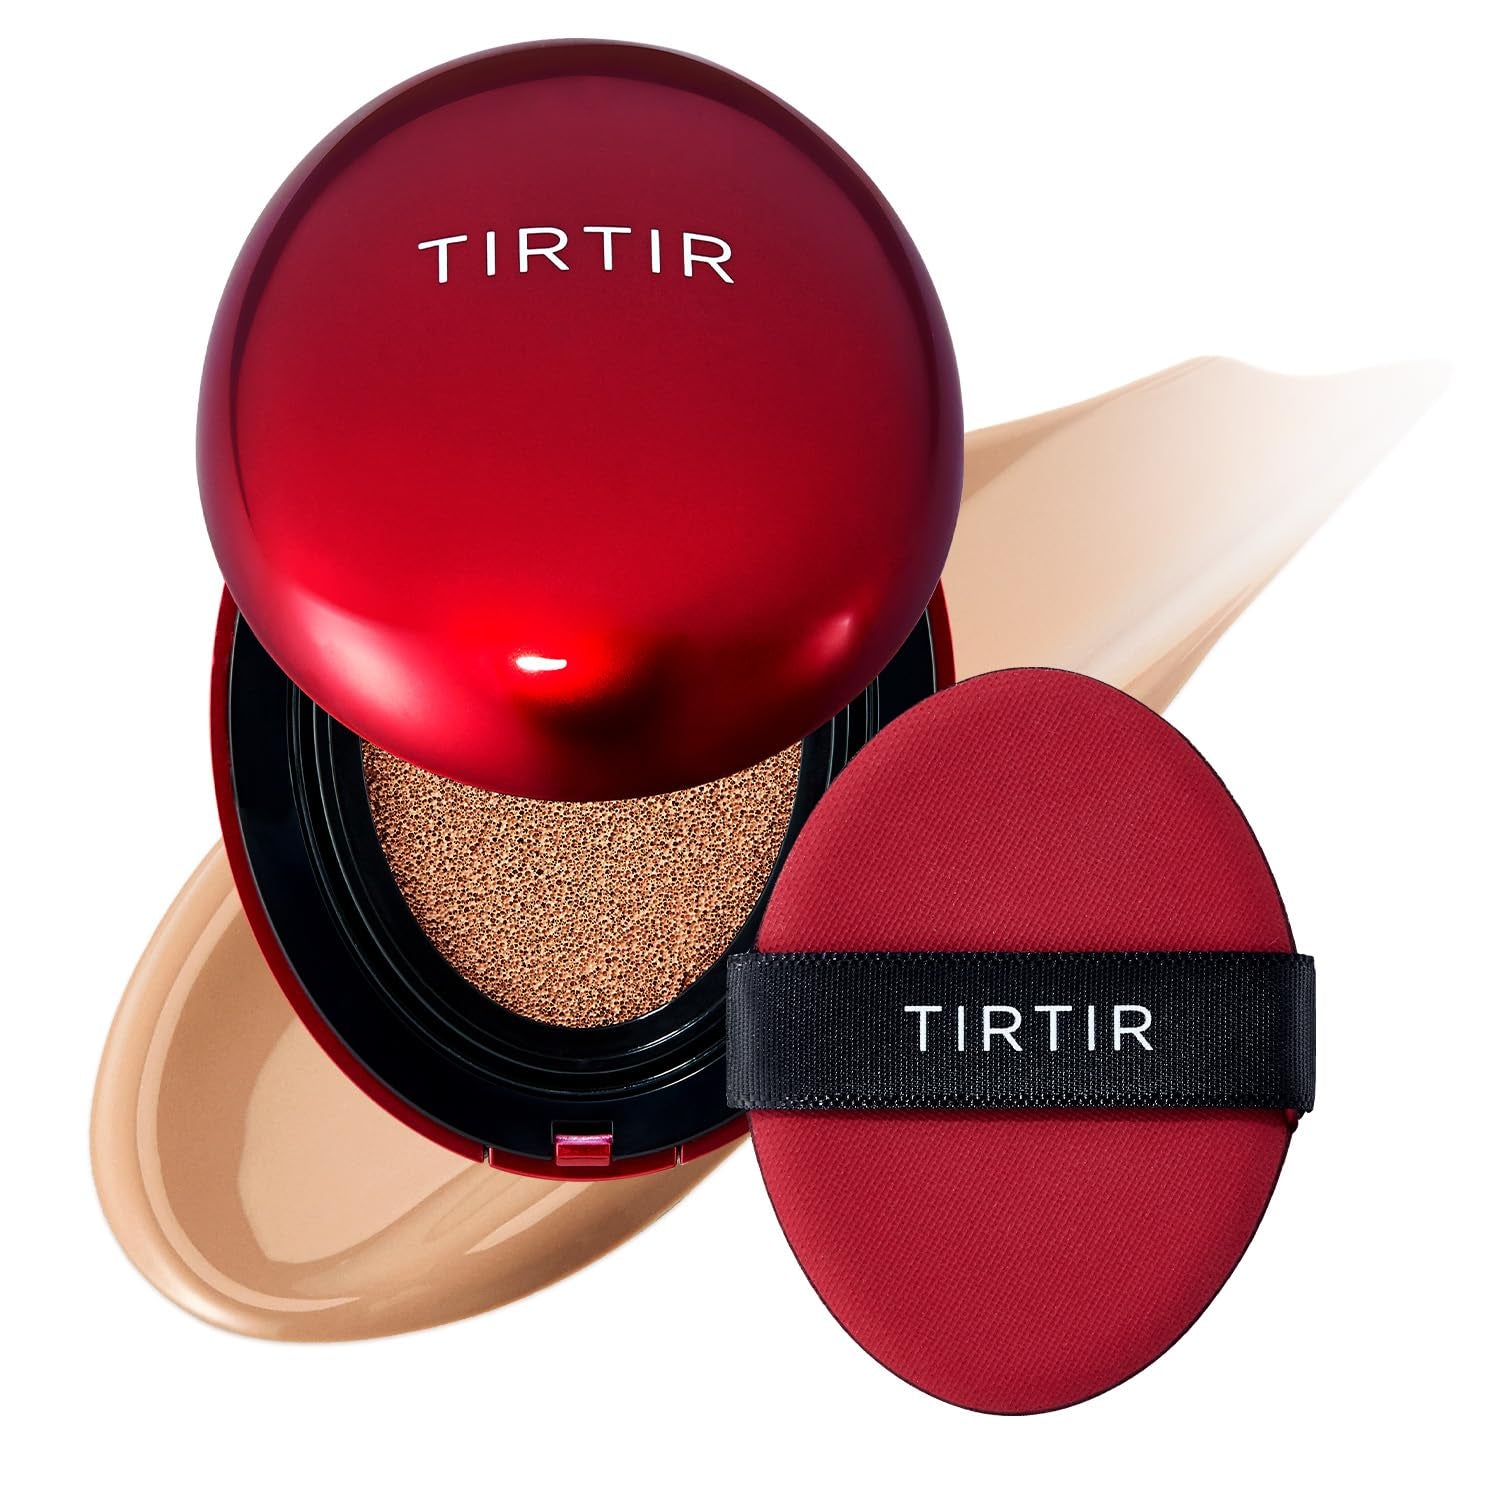 TIRITR Mask Fit Red Cushion Foundation | Japan'S No.1 Choice for Glass Skin, Long-Lasting, Lightweight, Buildable Coverage, Semi-Matte Finish, Korean Cushion Foundation, (0.63 Oz.), 27N Camel